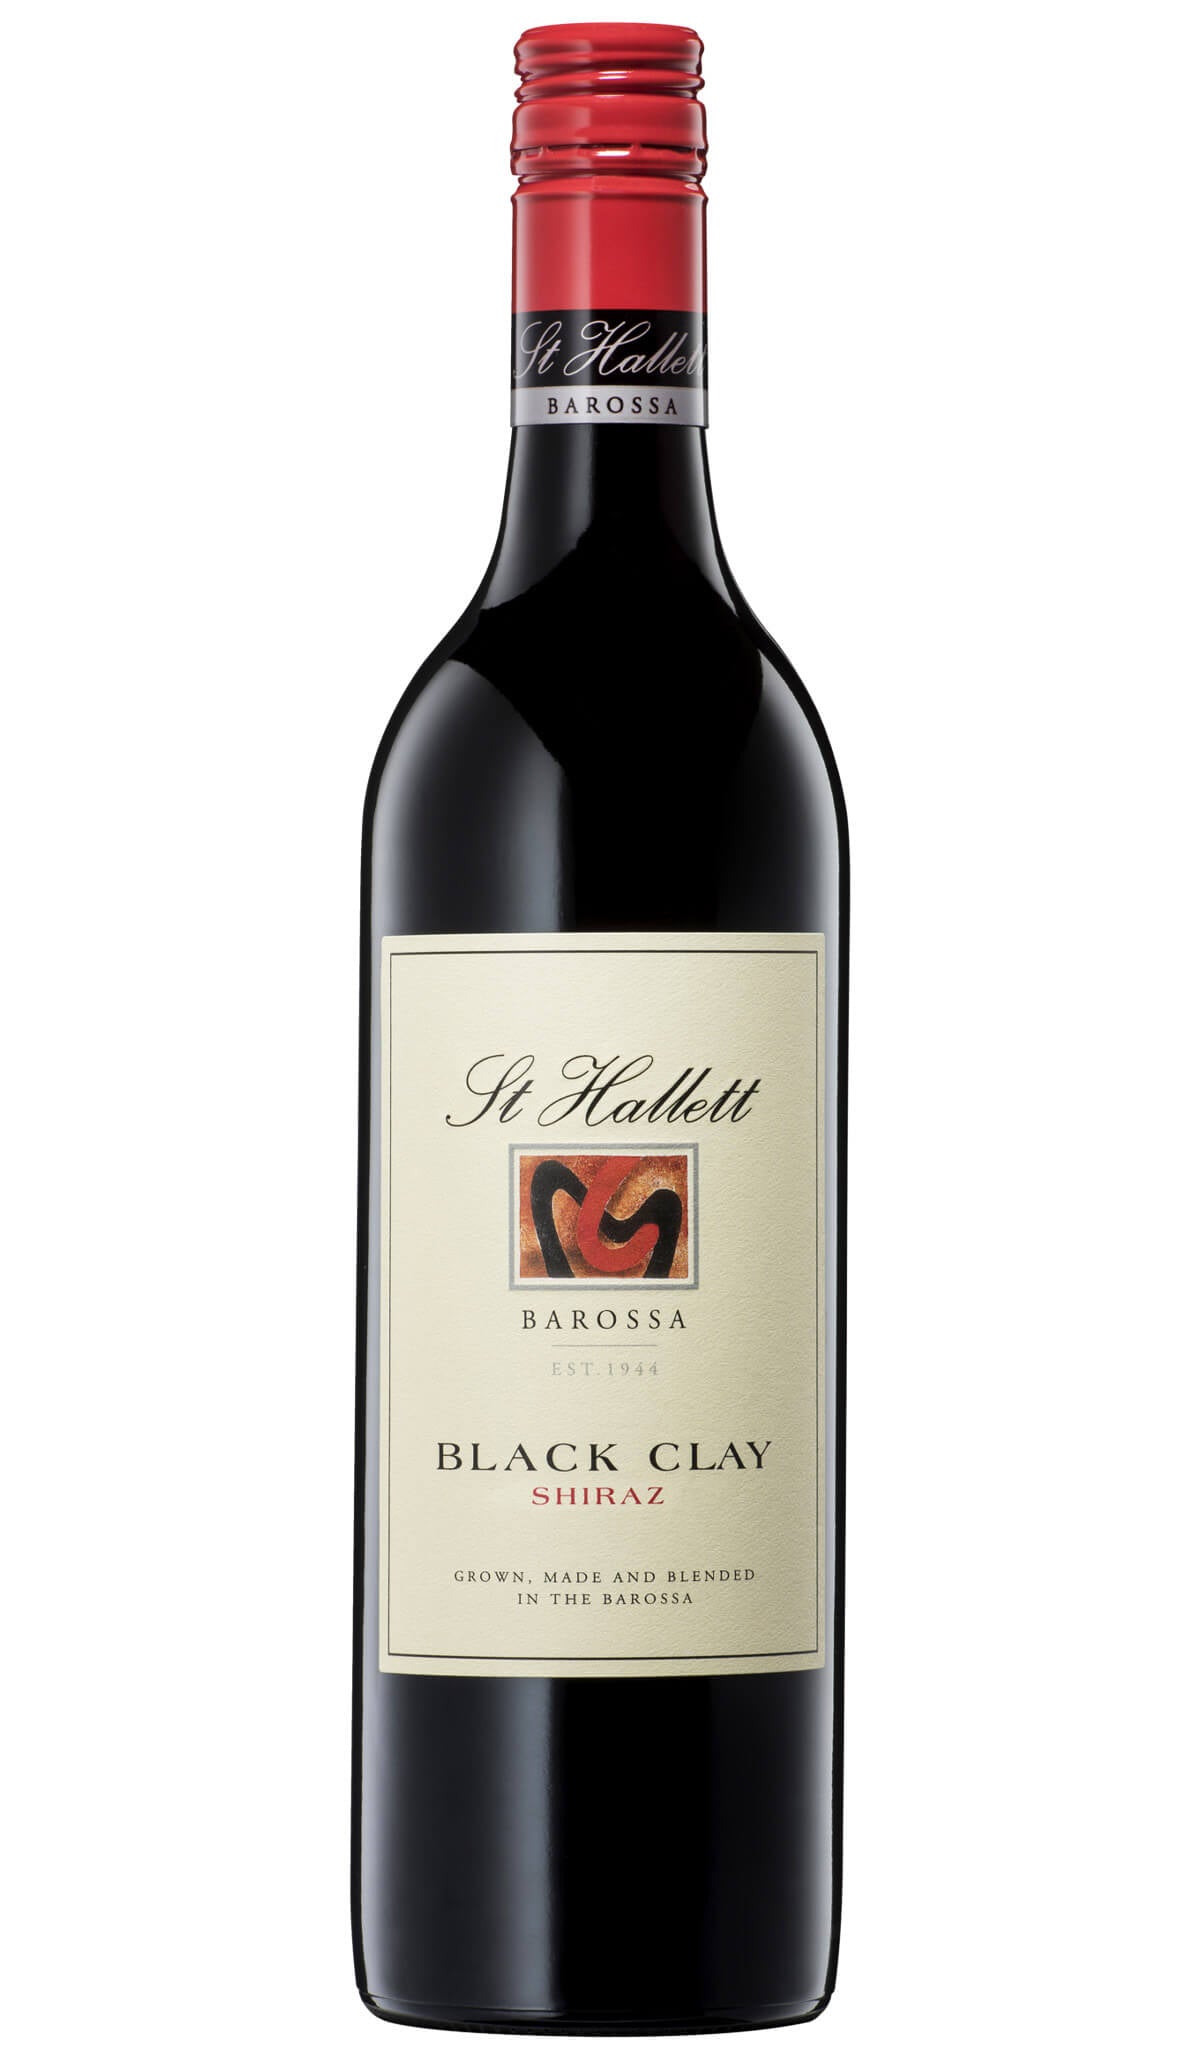 Find out more or buy St Hallett Black Clay Shiraz 2022 (Barossa Valley) online at Wine Sellers Direct - Australia’s independent liquor specialists.